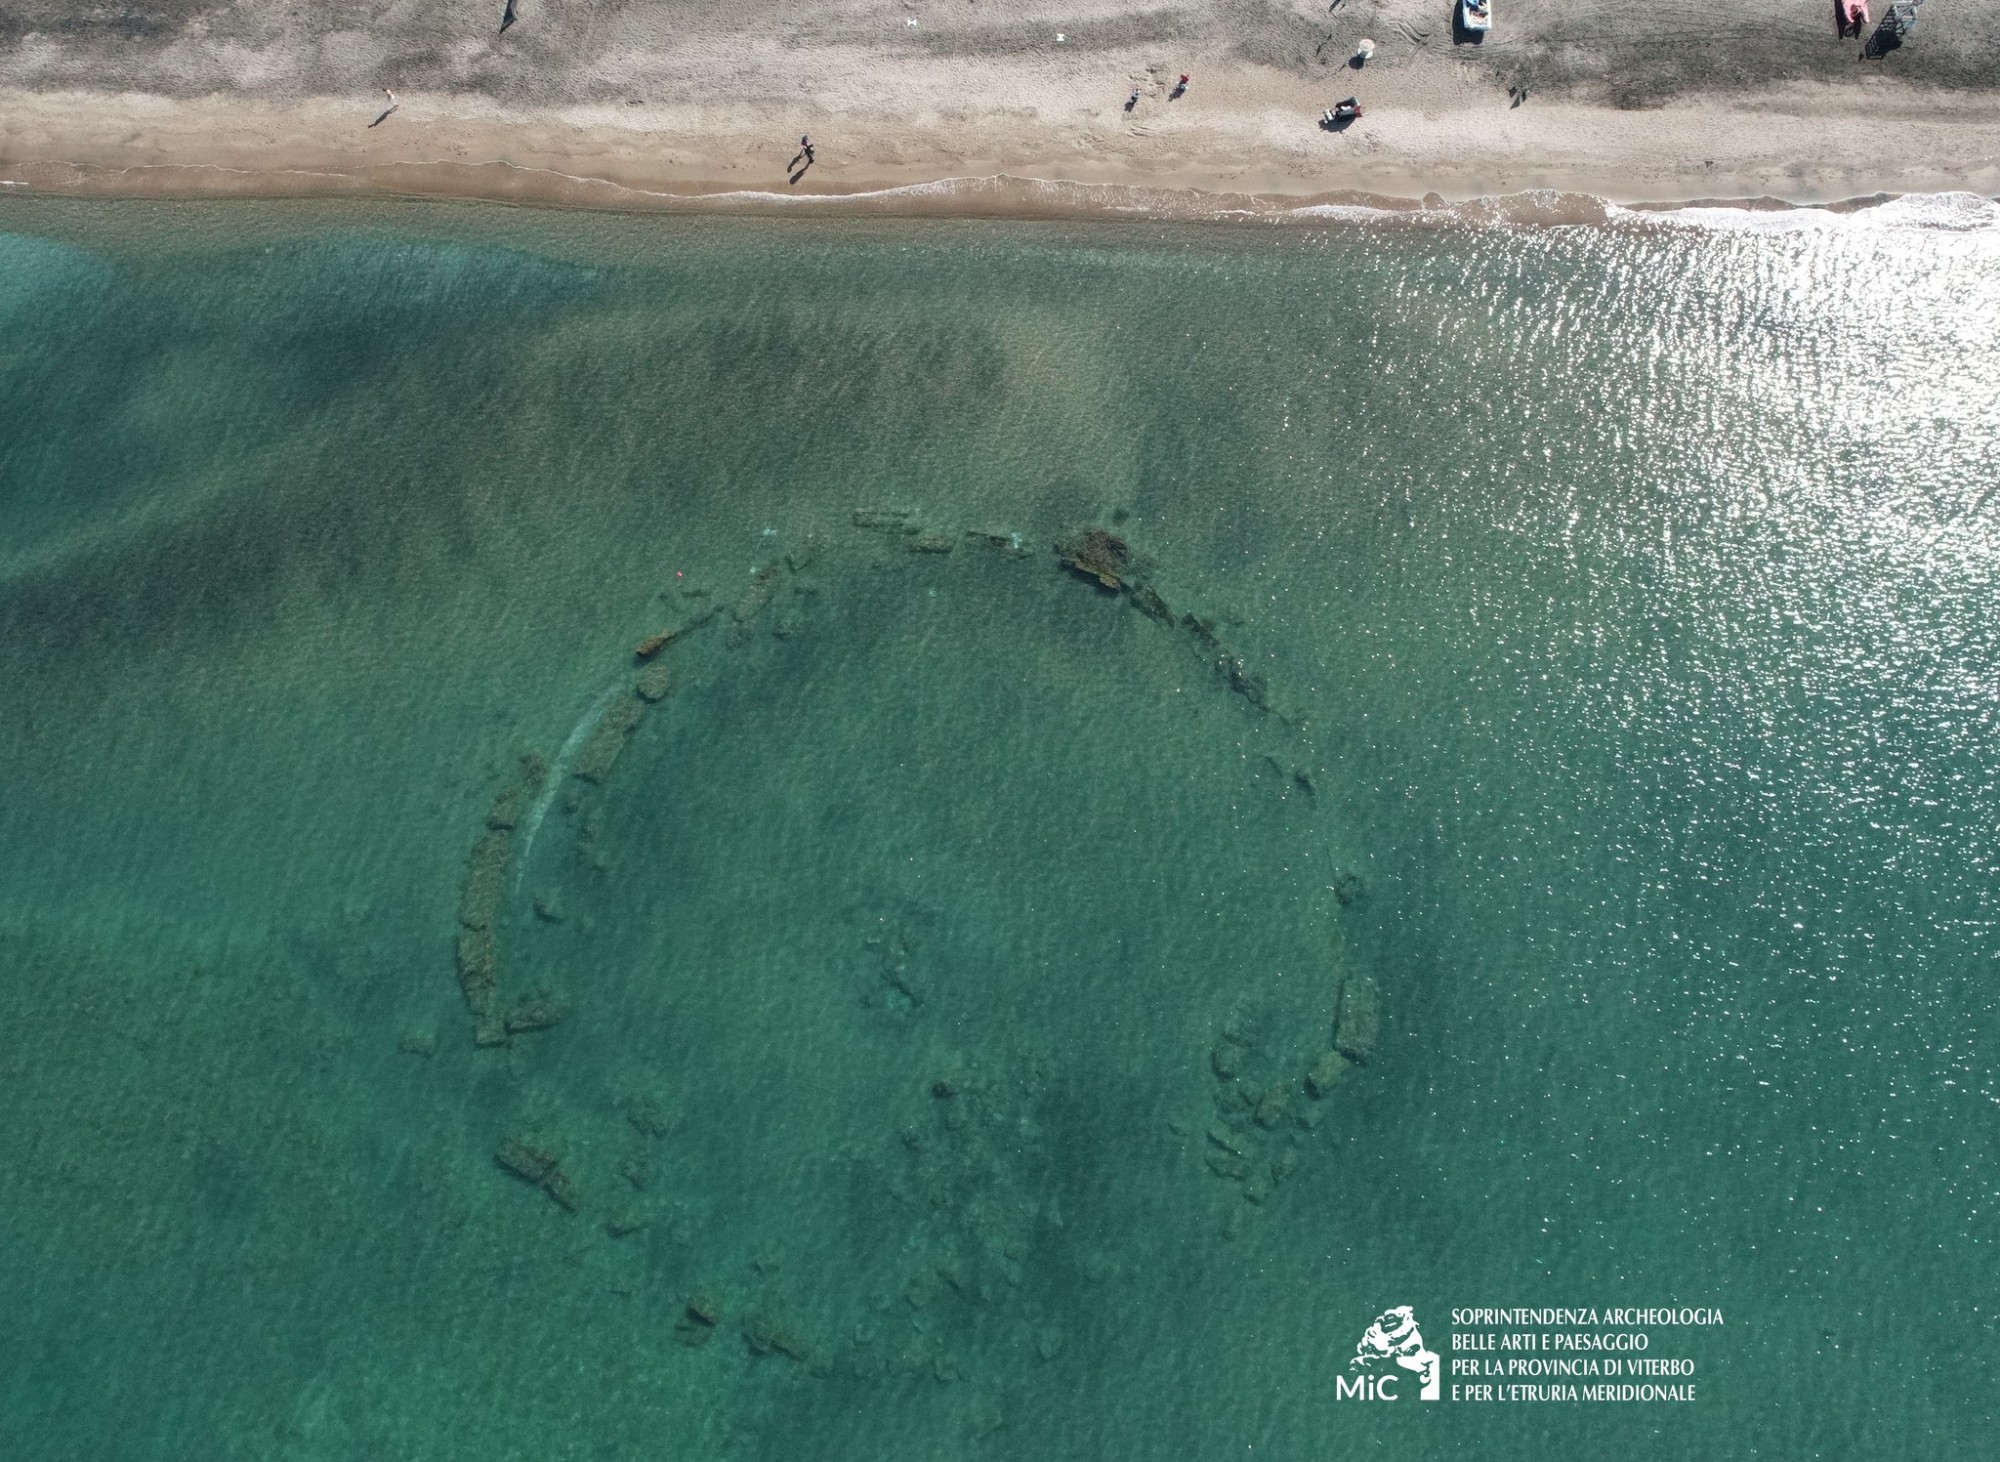 Further exploration revealed a circular structure with a diameter of approximately 50 meters, situated a few meters from the coast and completely submerged. Experts believe this to be a maritime pavilion associated with a Roman villa, though the full extent and complexity of the site are yet to be determined.